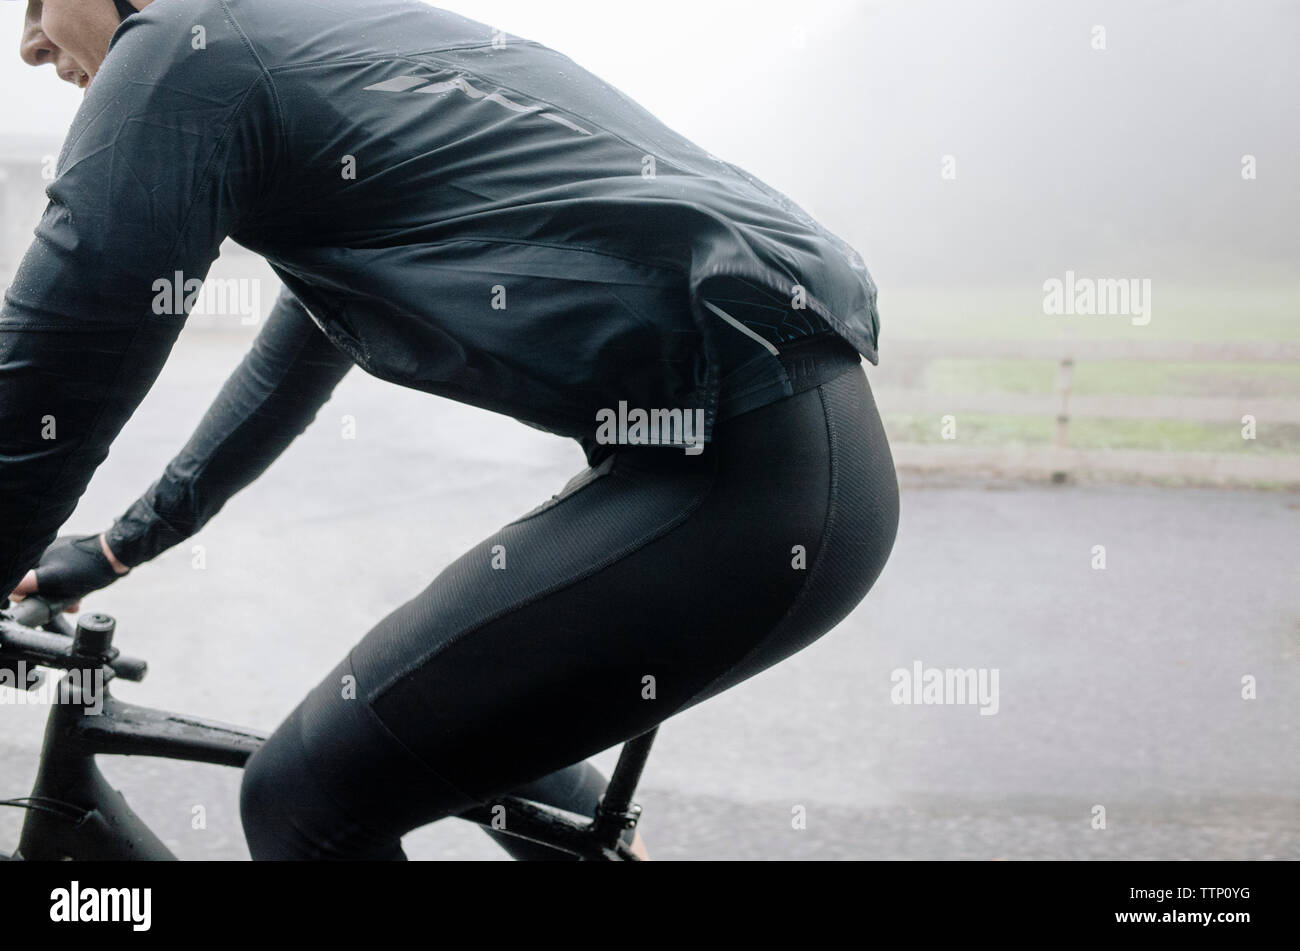 Man riding bicycle on street in foggy weather Stock Photo